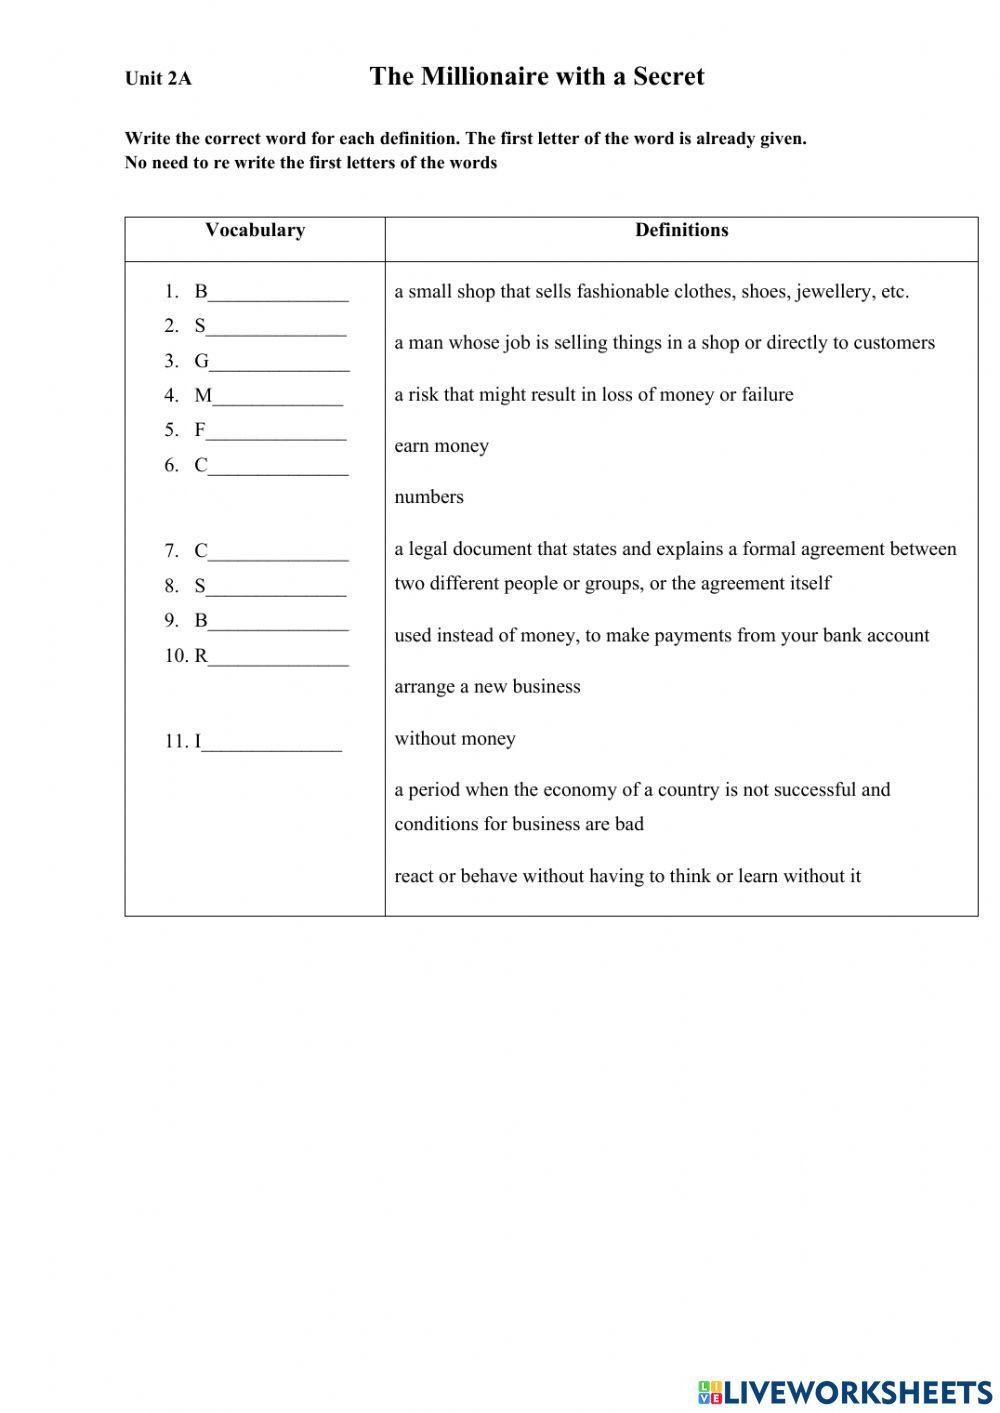 GEP 7A - Vocabulary - Millionaire - Page 17 -